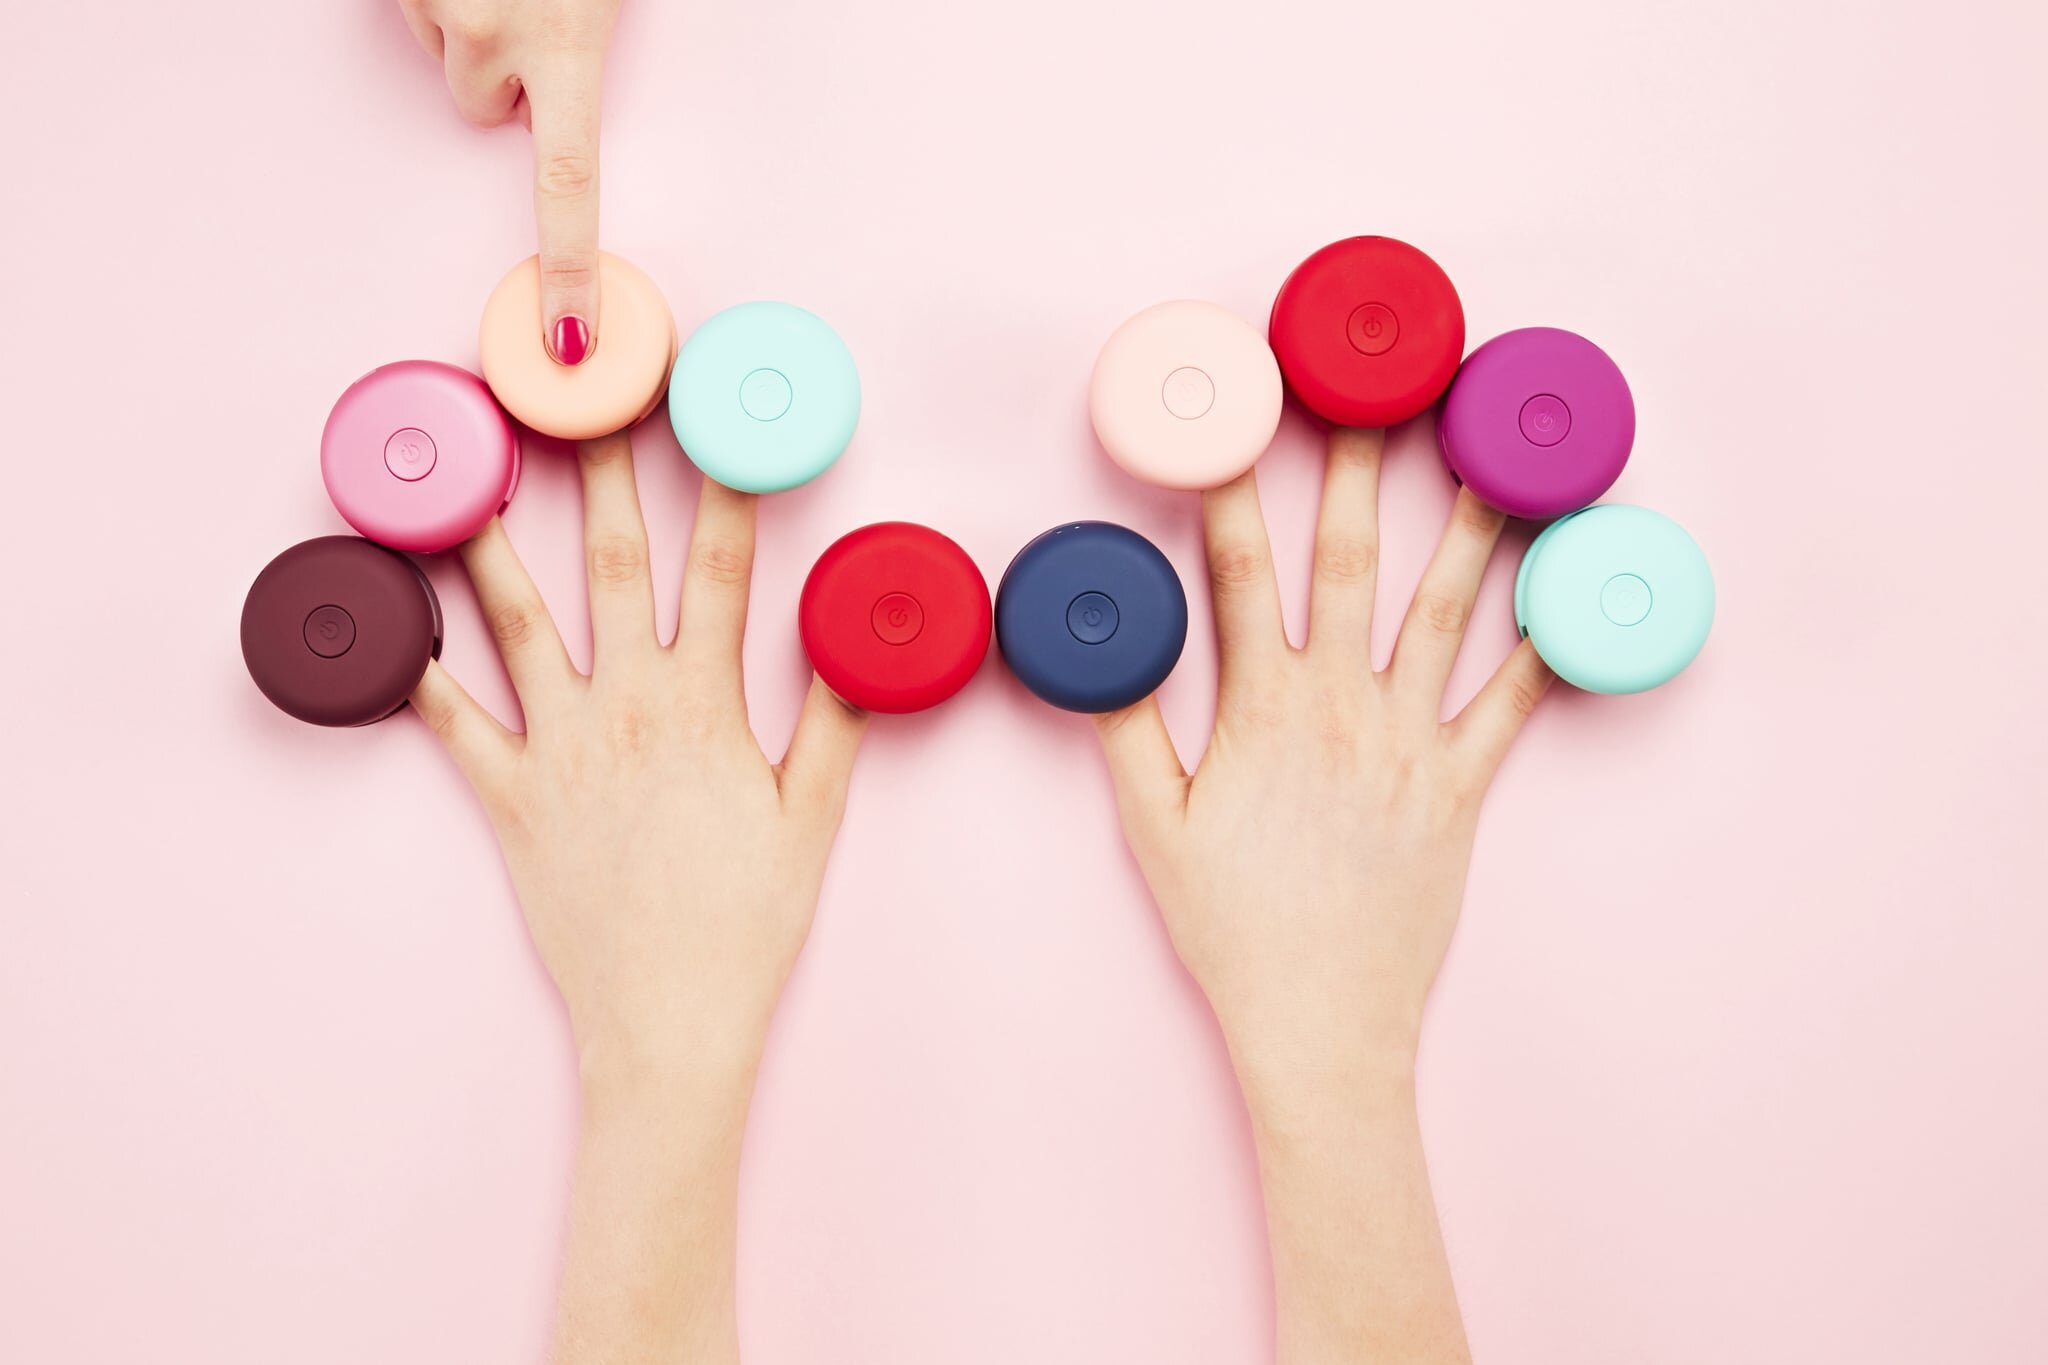 Pop Sugar | This Gel Manicure Kit Plugs Into Your Laptop For On-the-Go Nails